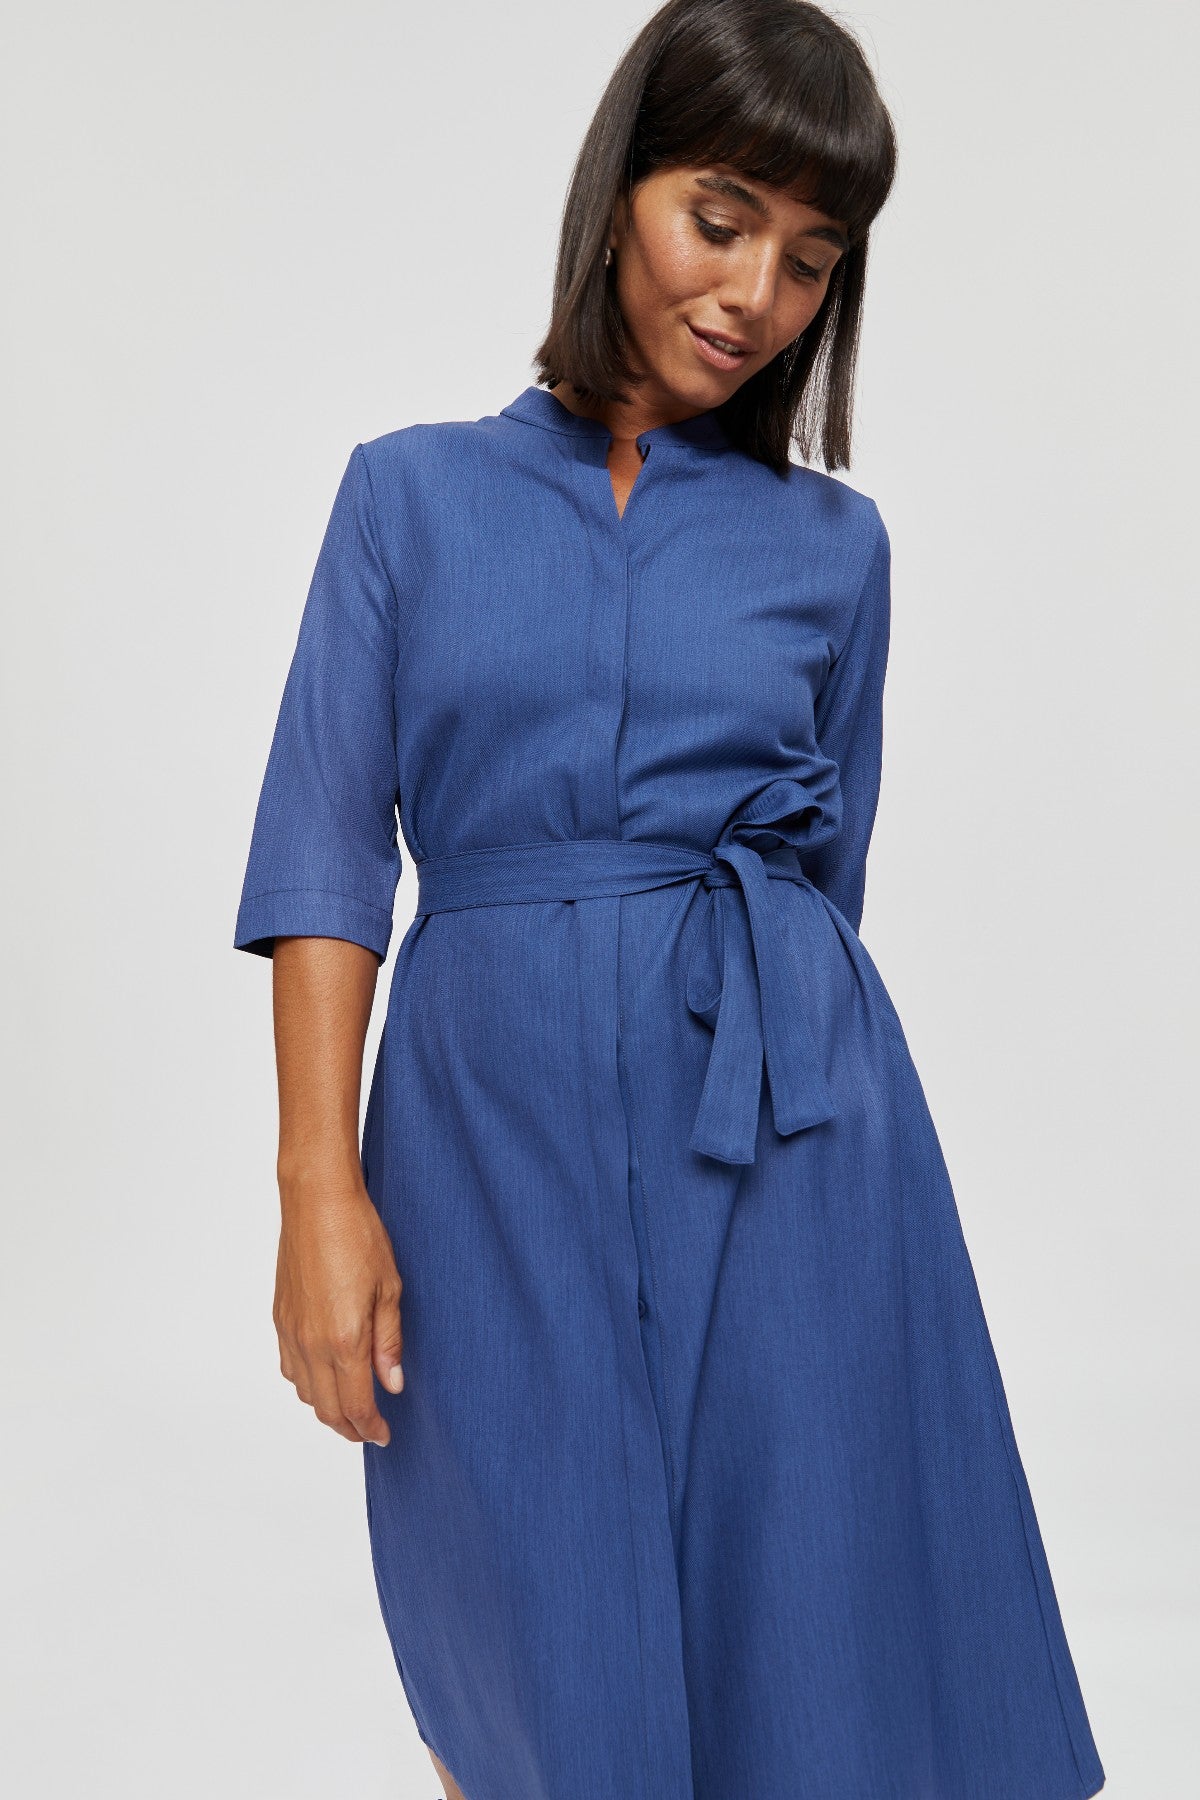 Navy Blue Shirtdress LIDIA. Midi Shirt Dress Cocktail and Line Dress · Knee Length with Pockets and 3/4 Sleeves - AYANI